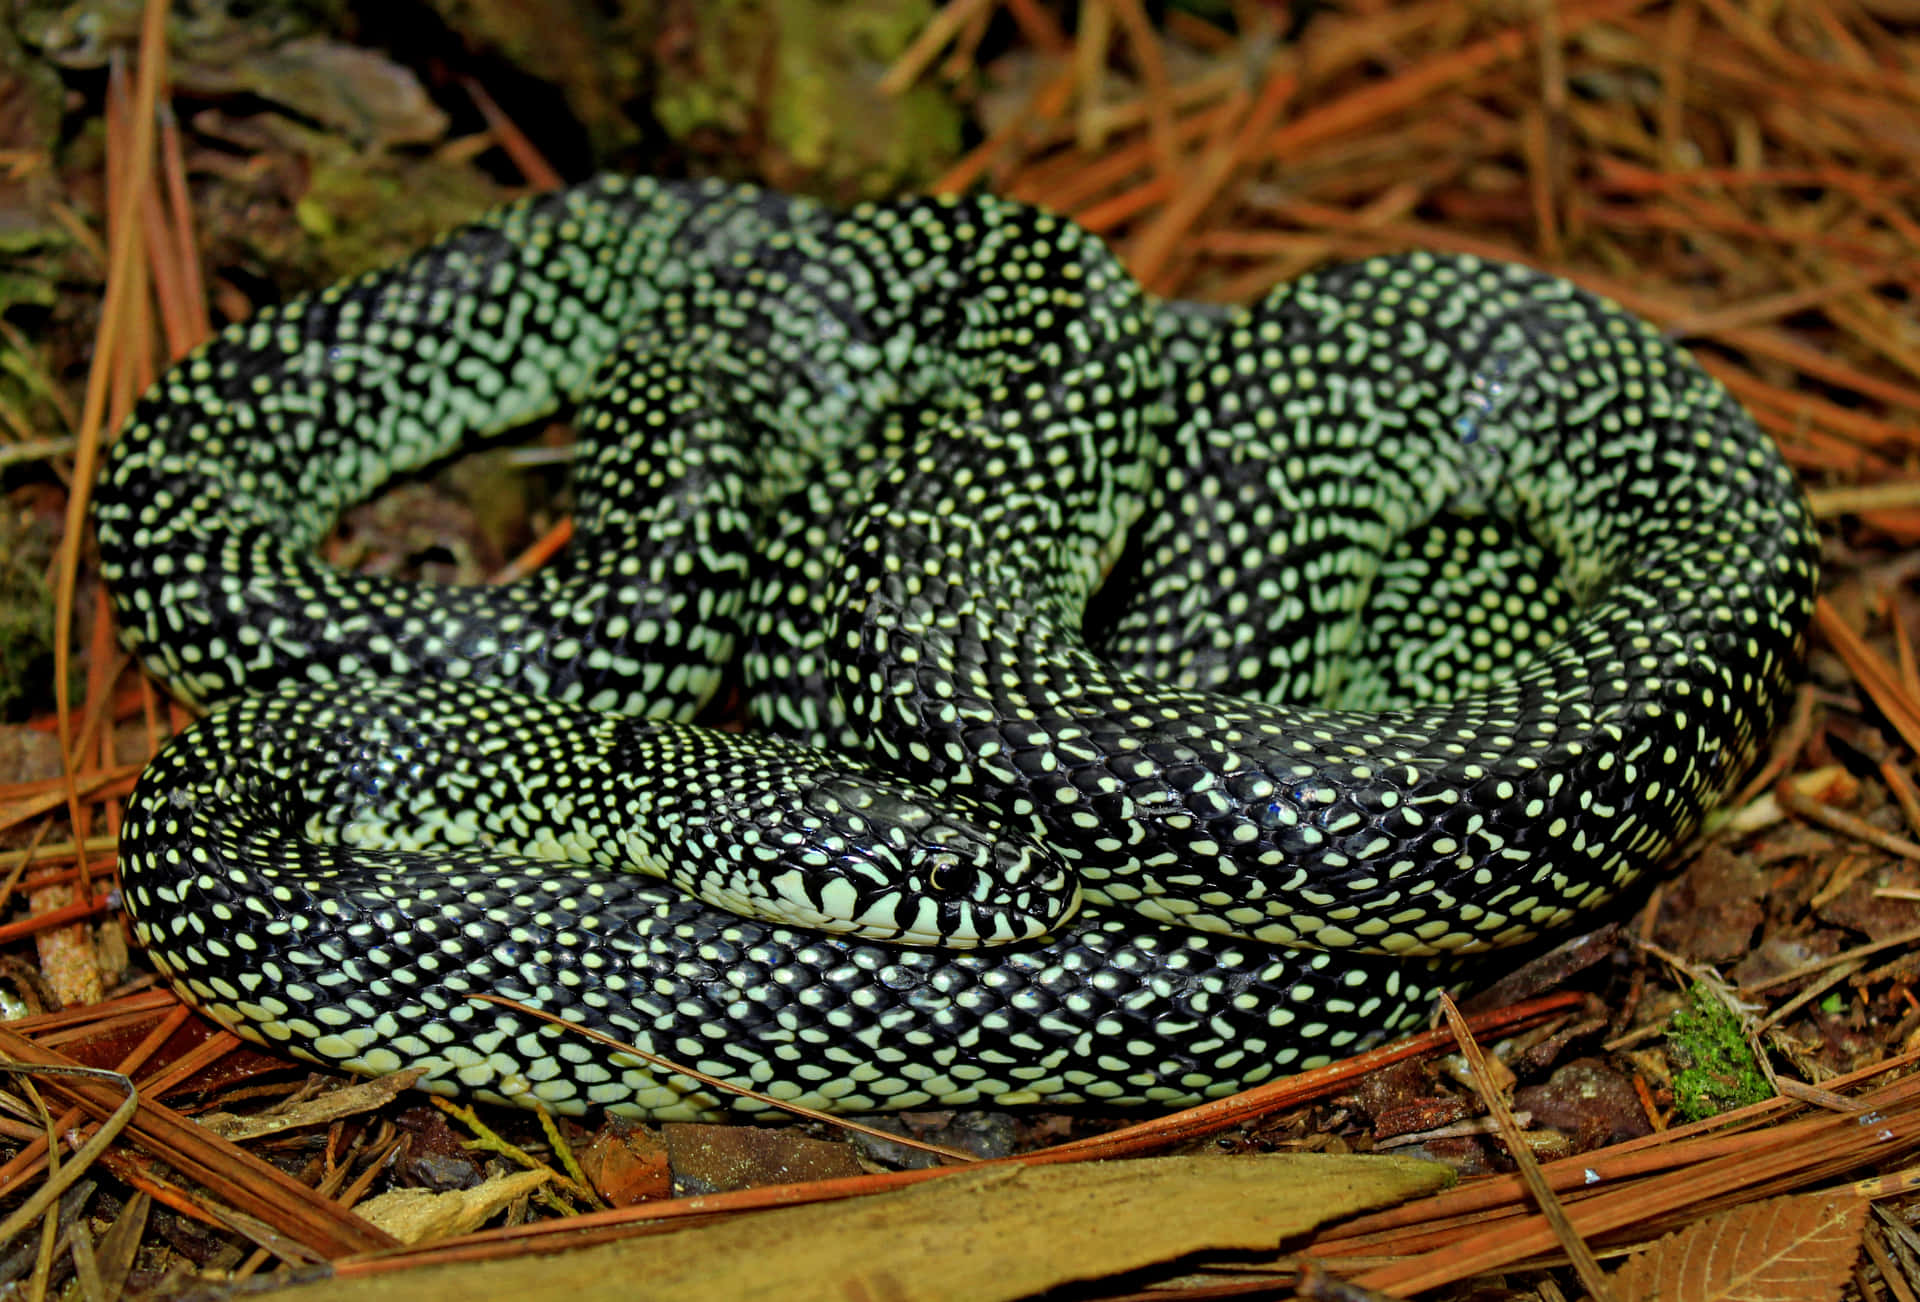 “Brightly Colored King Snake Species”